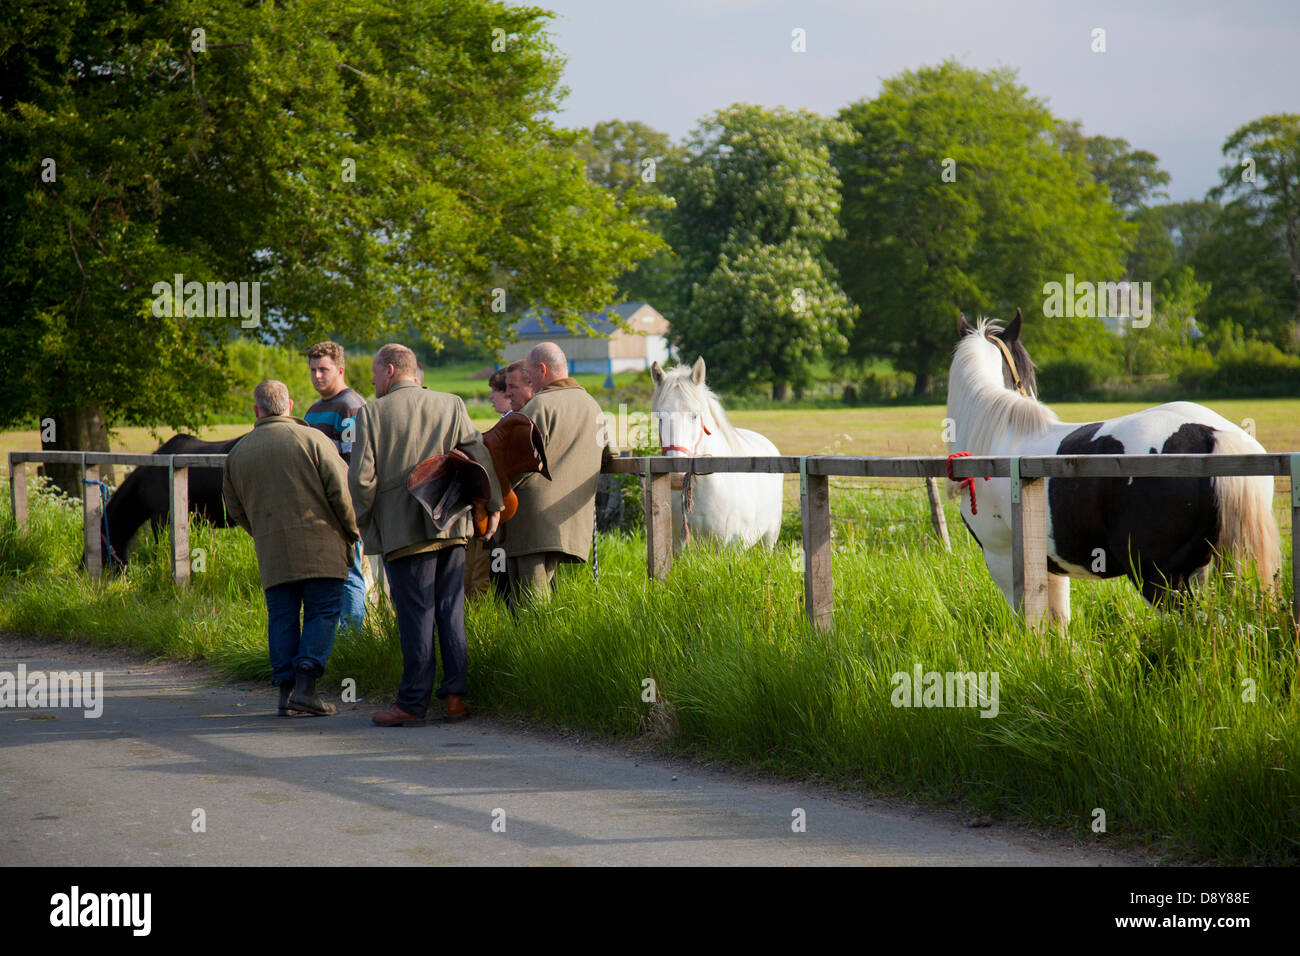 Appleby, Cumbria, Uk. 6th June, 2013.  A meeting of minds, horse trading  at the Appleby Horse Fair in Cumbria.  The Fair is an annual gathering of Gypsies and Travellers which takes place on the first week in June, and has taken place since the reign of James II, who granted a Royal charter in 1685 allowing a horse fair 'near to the River Eden'. Credit:  Mar Photographics/Alamy Live News Stock Photo